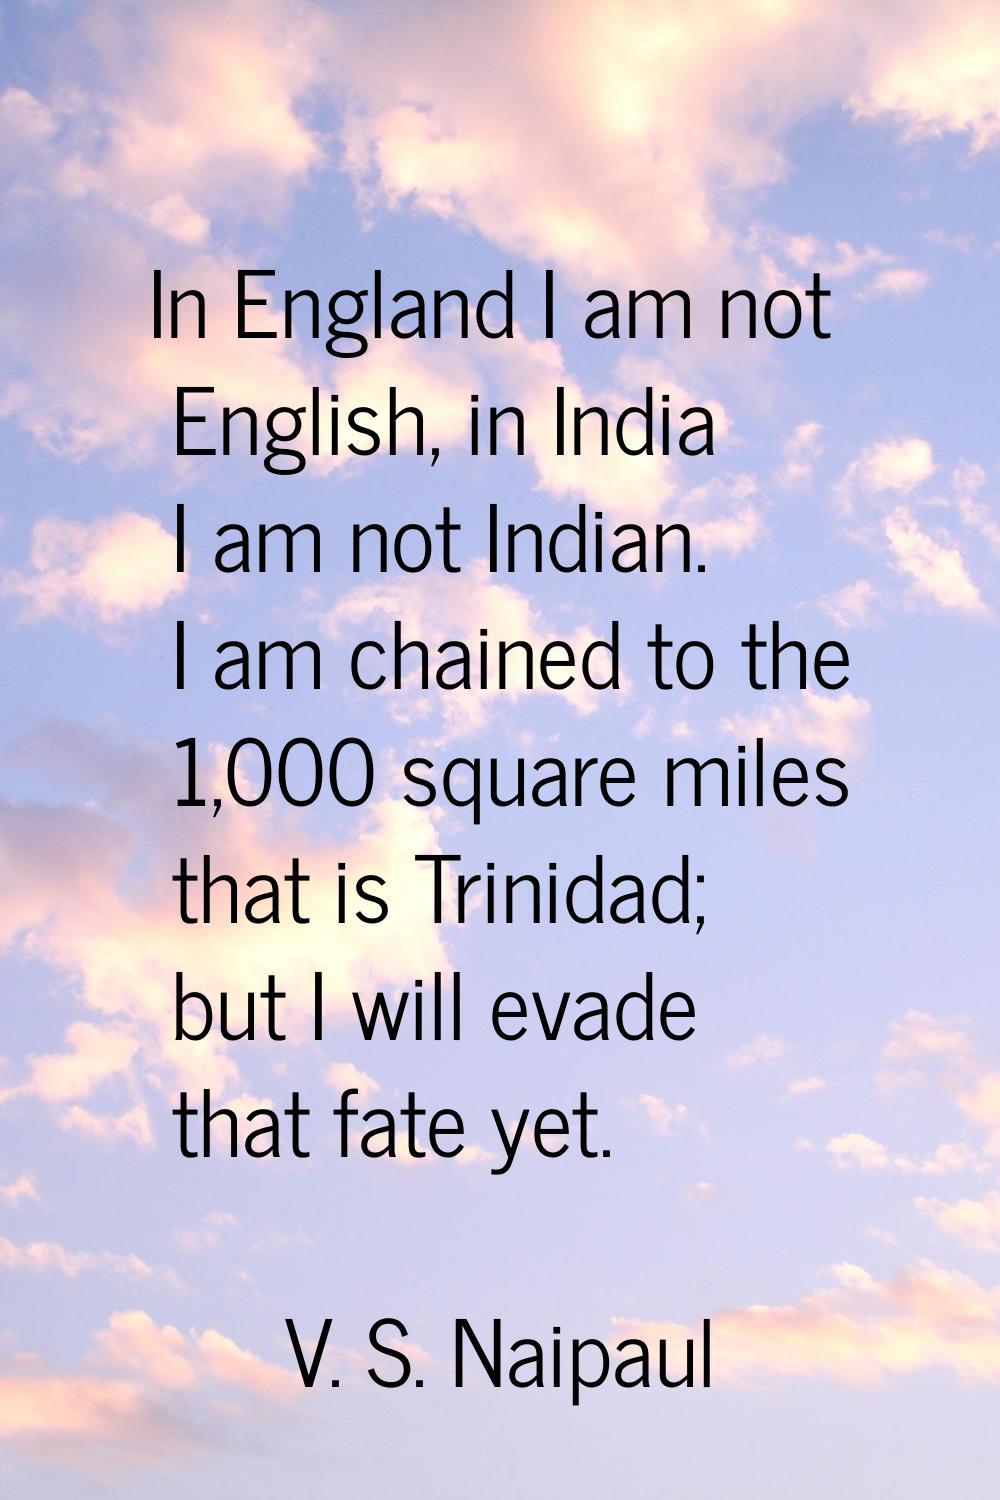 In England I am not English, in India I am not Indian. I am chained to the 1,000 square miles that 